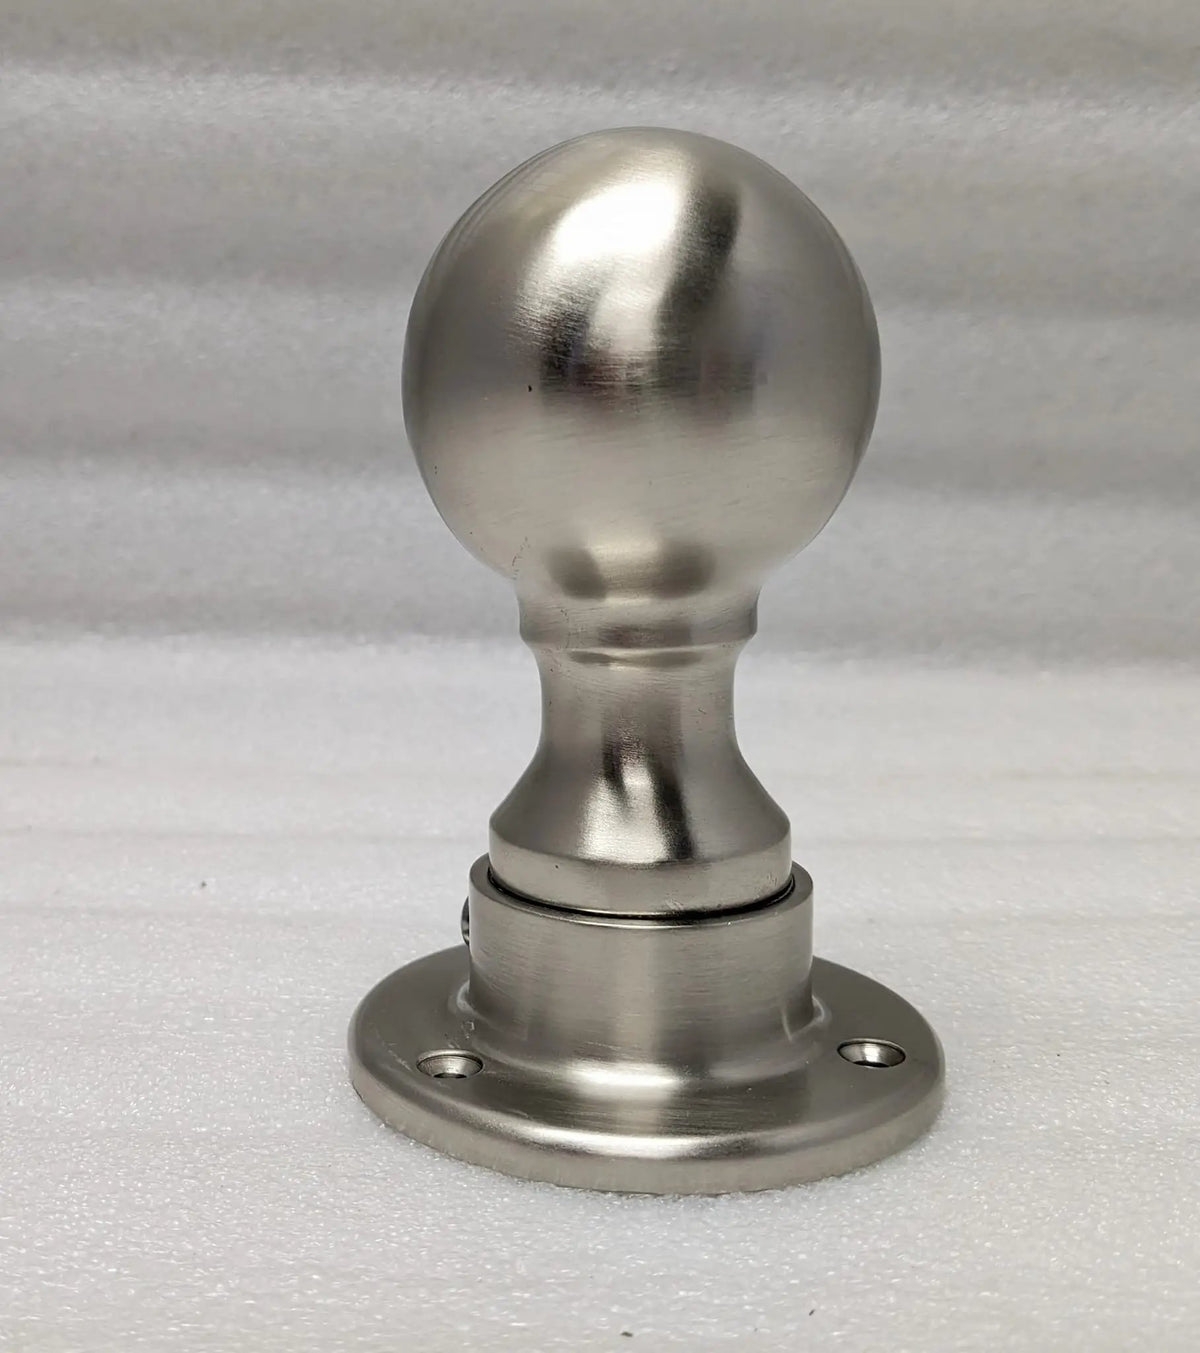 Ball Flange 2" Components For 2" Od Tubing, Hospitality Fixtures Brushed-Stainless-Steel Trade Diversified